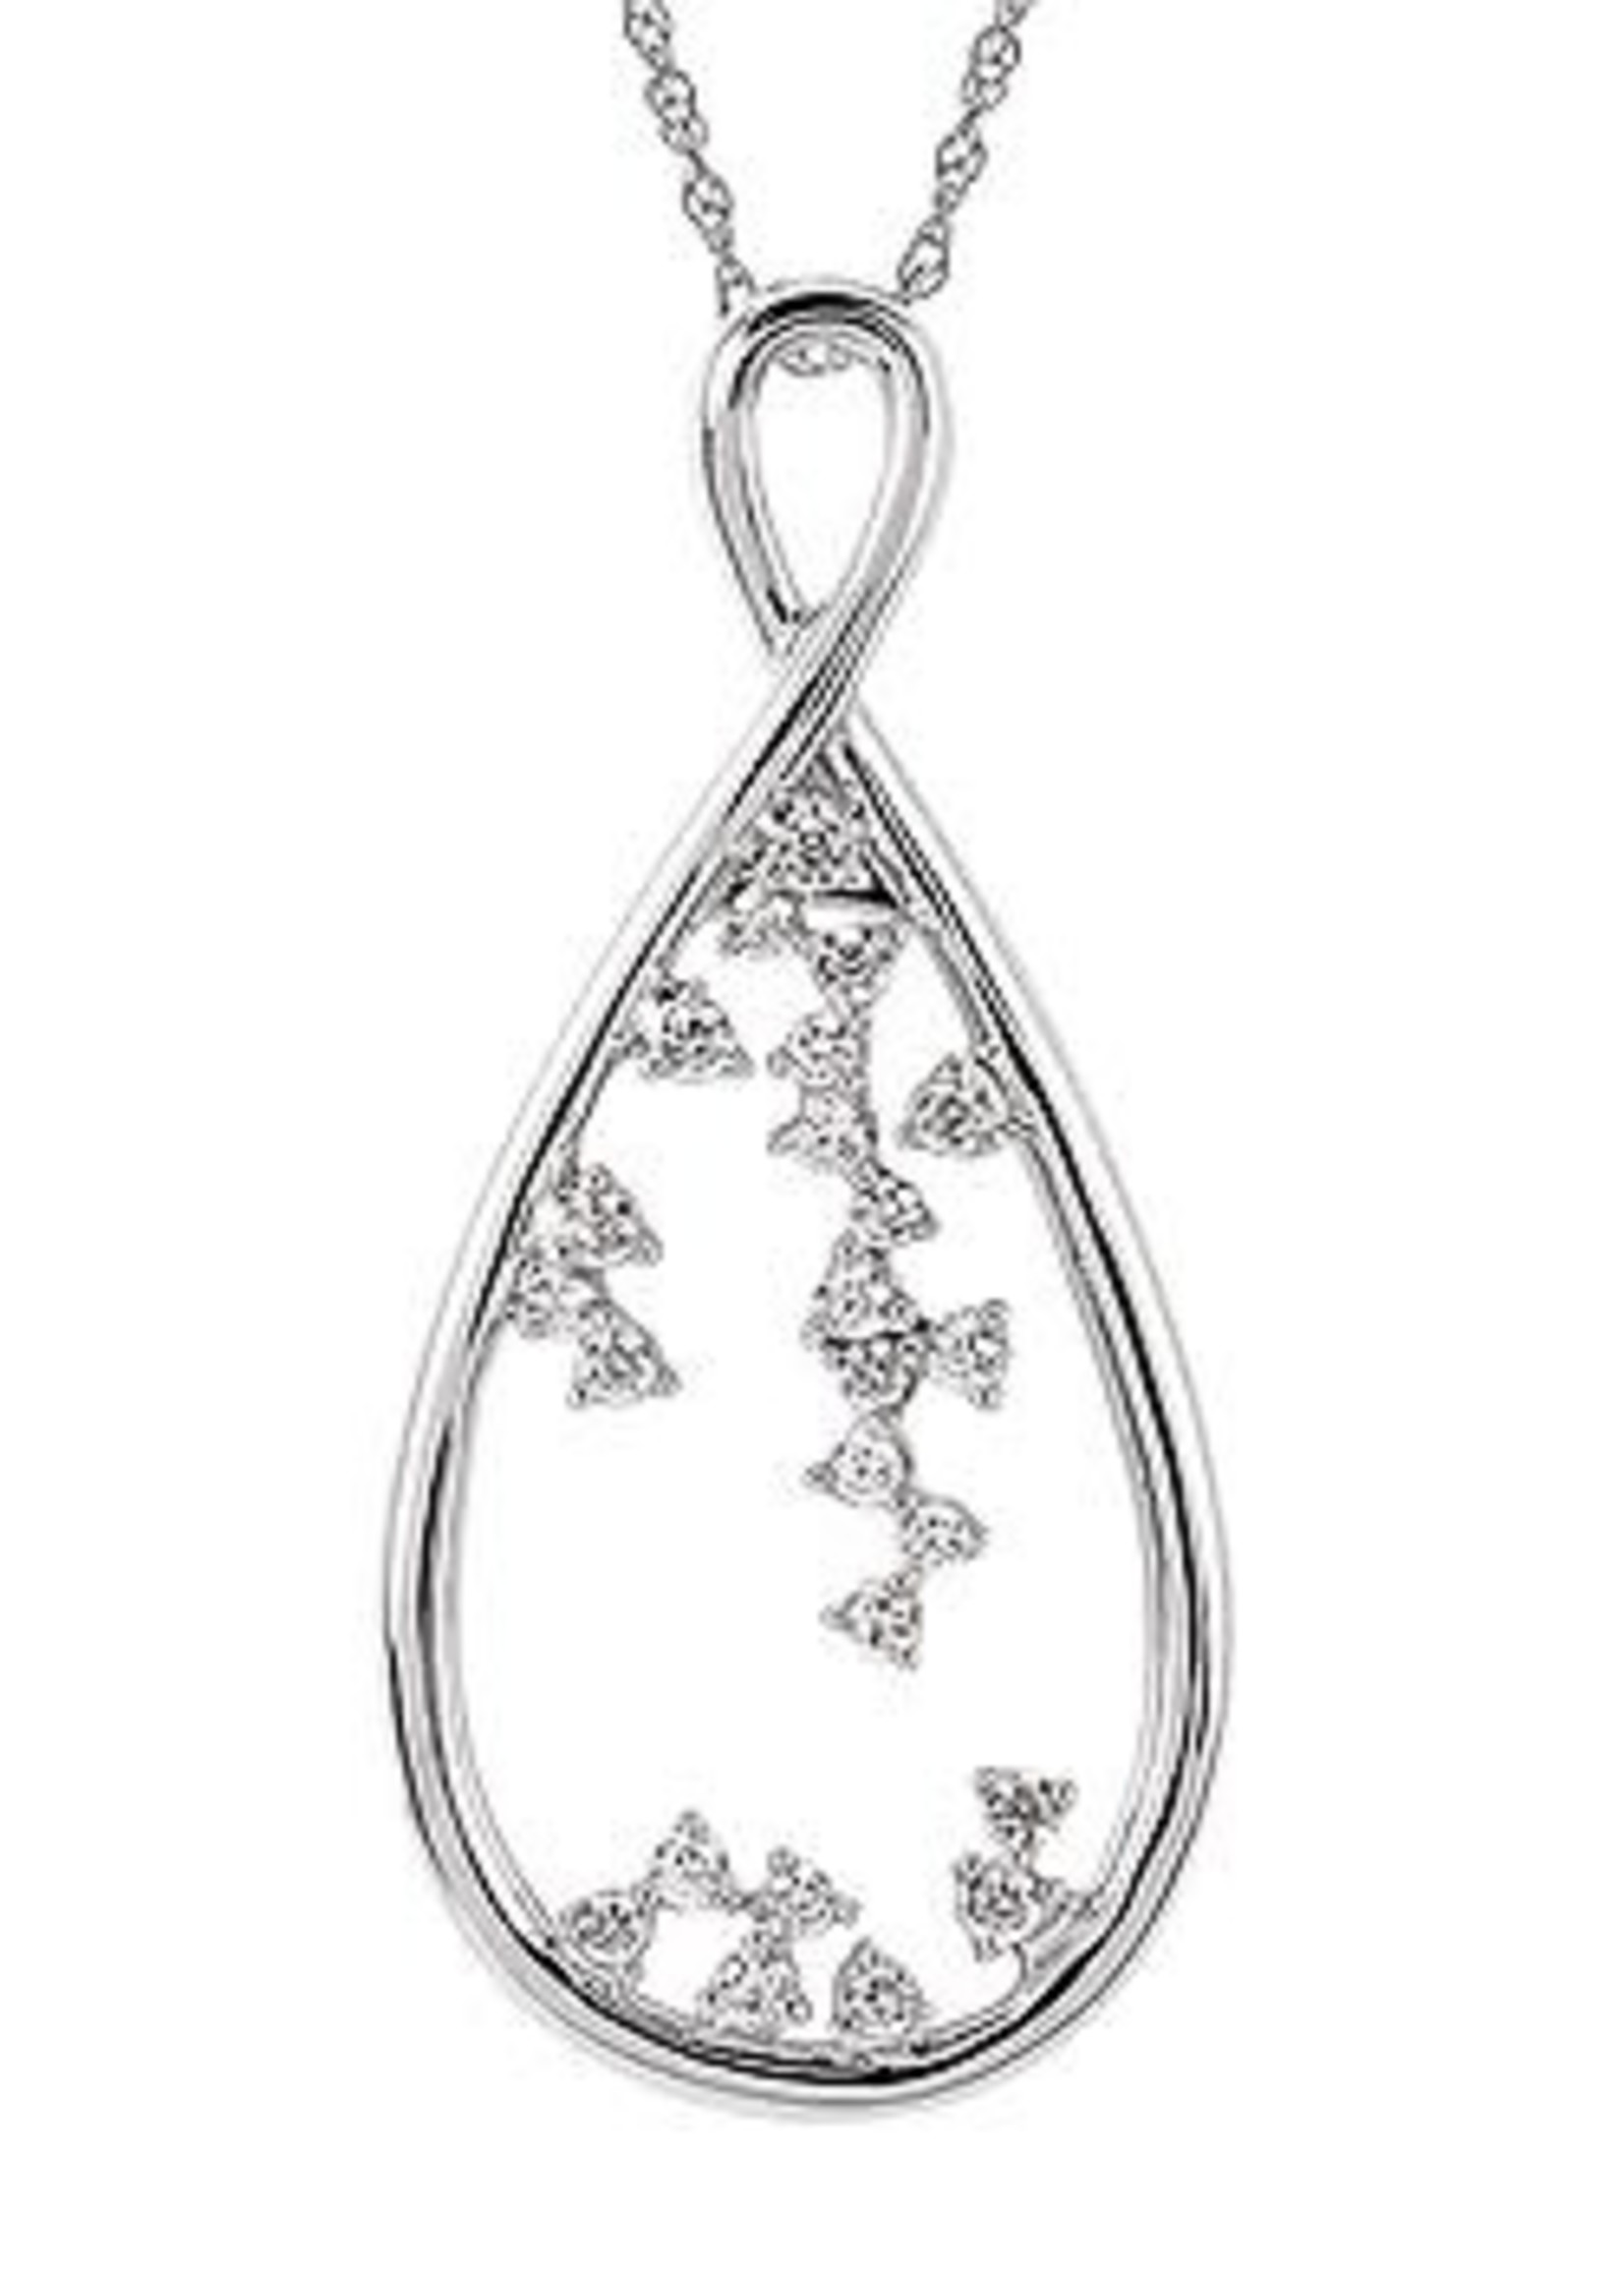 OSTBYE & ANDERSON 14KW Scattered Diamond Pear Shaped Pendant w/chain 0.20CTTW